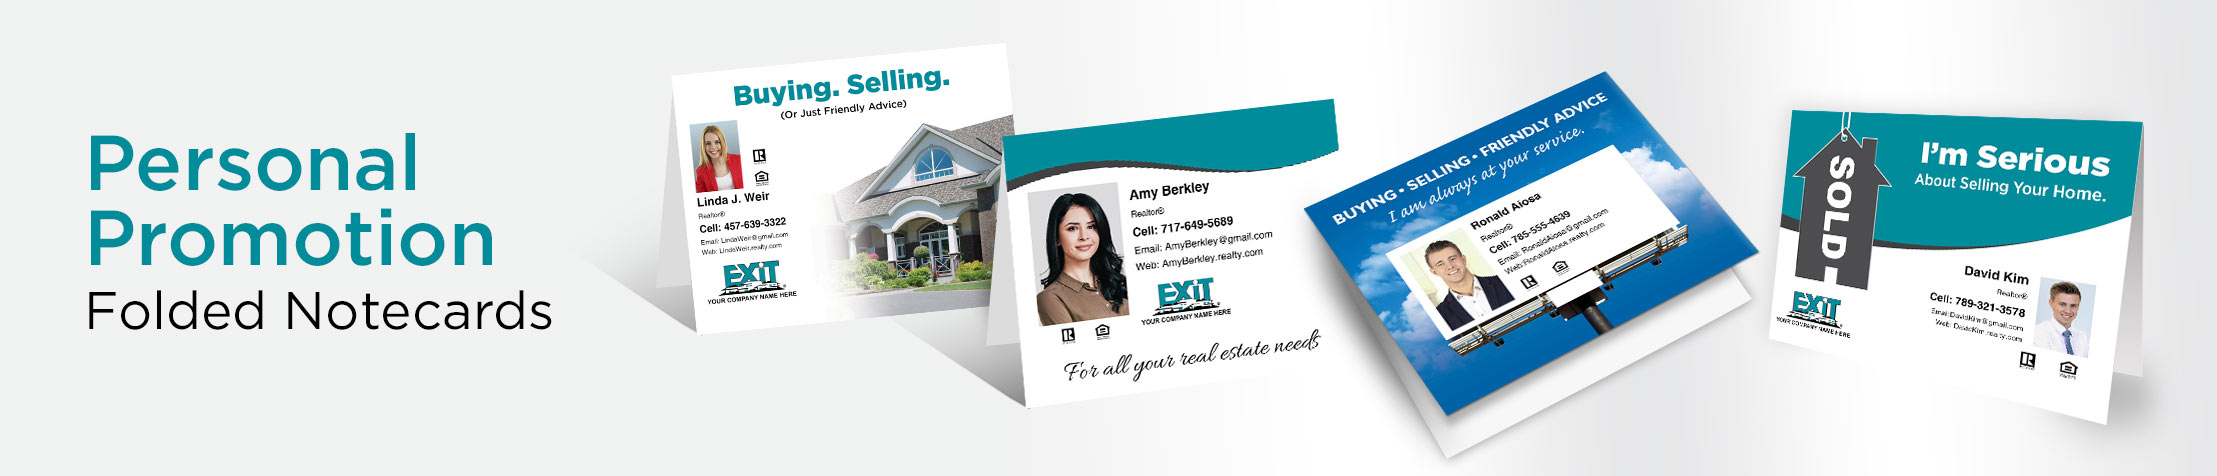 Exit Realty Personal Promotion Folded Note Cards - Exit Realty approved vendor note card stationery | BestPrintBuy.com